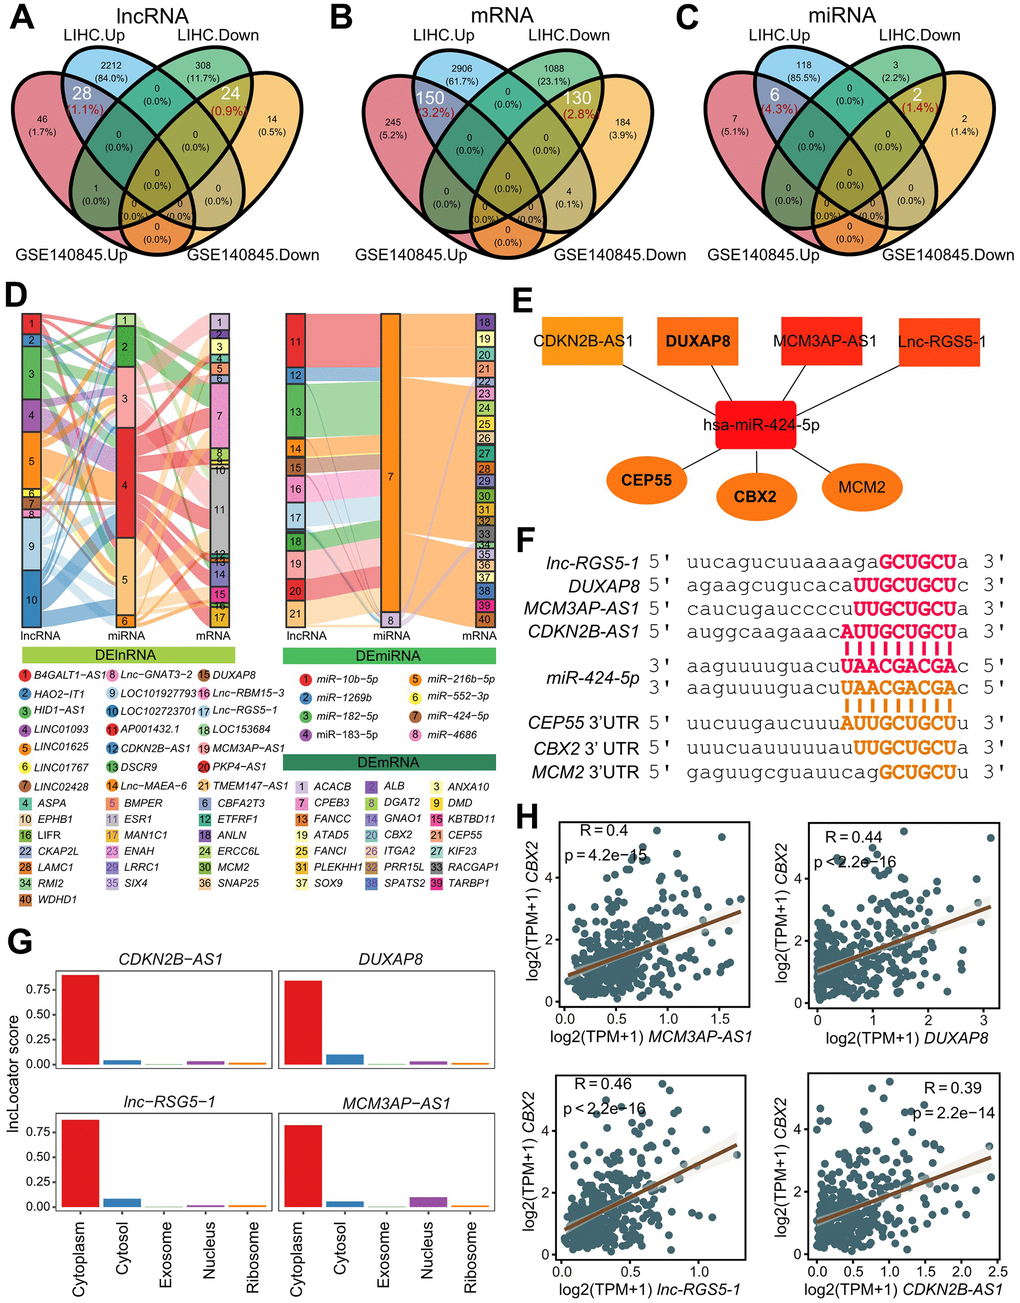 Identification and validation of refined hubs in triple regulatory networks. (A–C) The overlapping differential expressed genes including lncRNAs (A), miRNAs (B) and mRNAs (C) identified by DESeq2 (FDR:0.01, log2FC:1) with TCGA-LIHC and GSE140845. (D) The Sankey plot indicates the triple regulatory network based on the strategies. The thickness of lines do not make sense. (E) Strategy-one hub of refined triple regulatory networks determined by a Cytoscape plug-in CytoHubba. (F) The base pairing diagram of binding sites for the strategy-one triple regulatory network predicted by miRanda. (G) The predicted cellular localization for 4 lncRNAs in the strategy-one hub using lncLocator. (H) The Pearson’s correlation between CBX2 and 4 lncRNAs in the strategy-one hub.